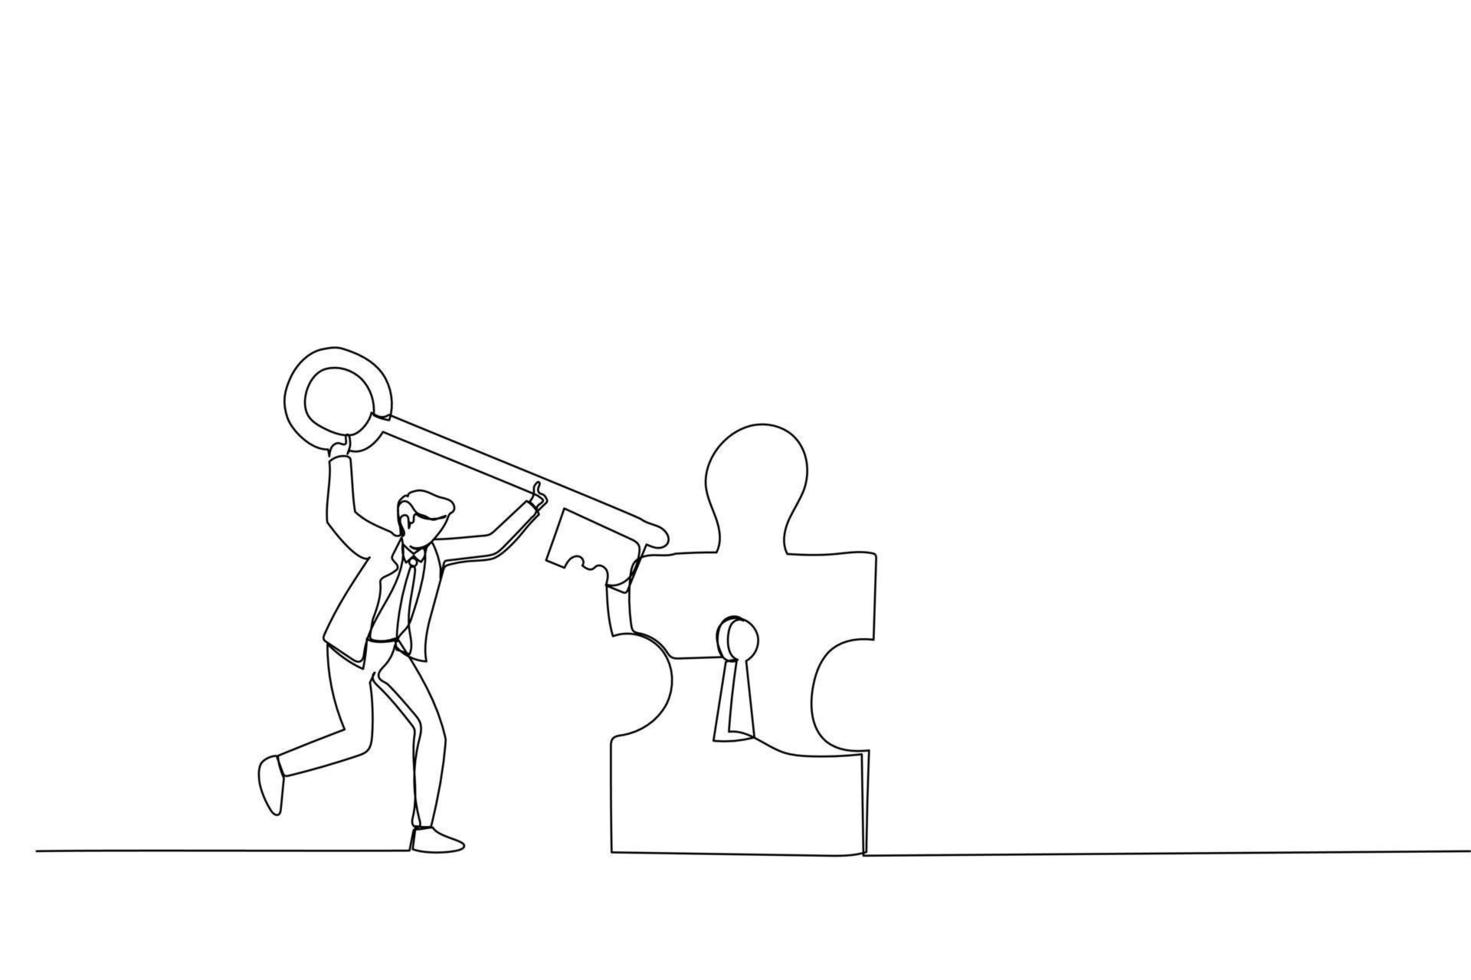 Cartoon of young businessman standing opening puzzle door with big key. Metaphor for achieving goal, solution and success. Single continuous line art style vector